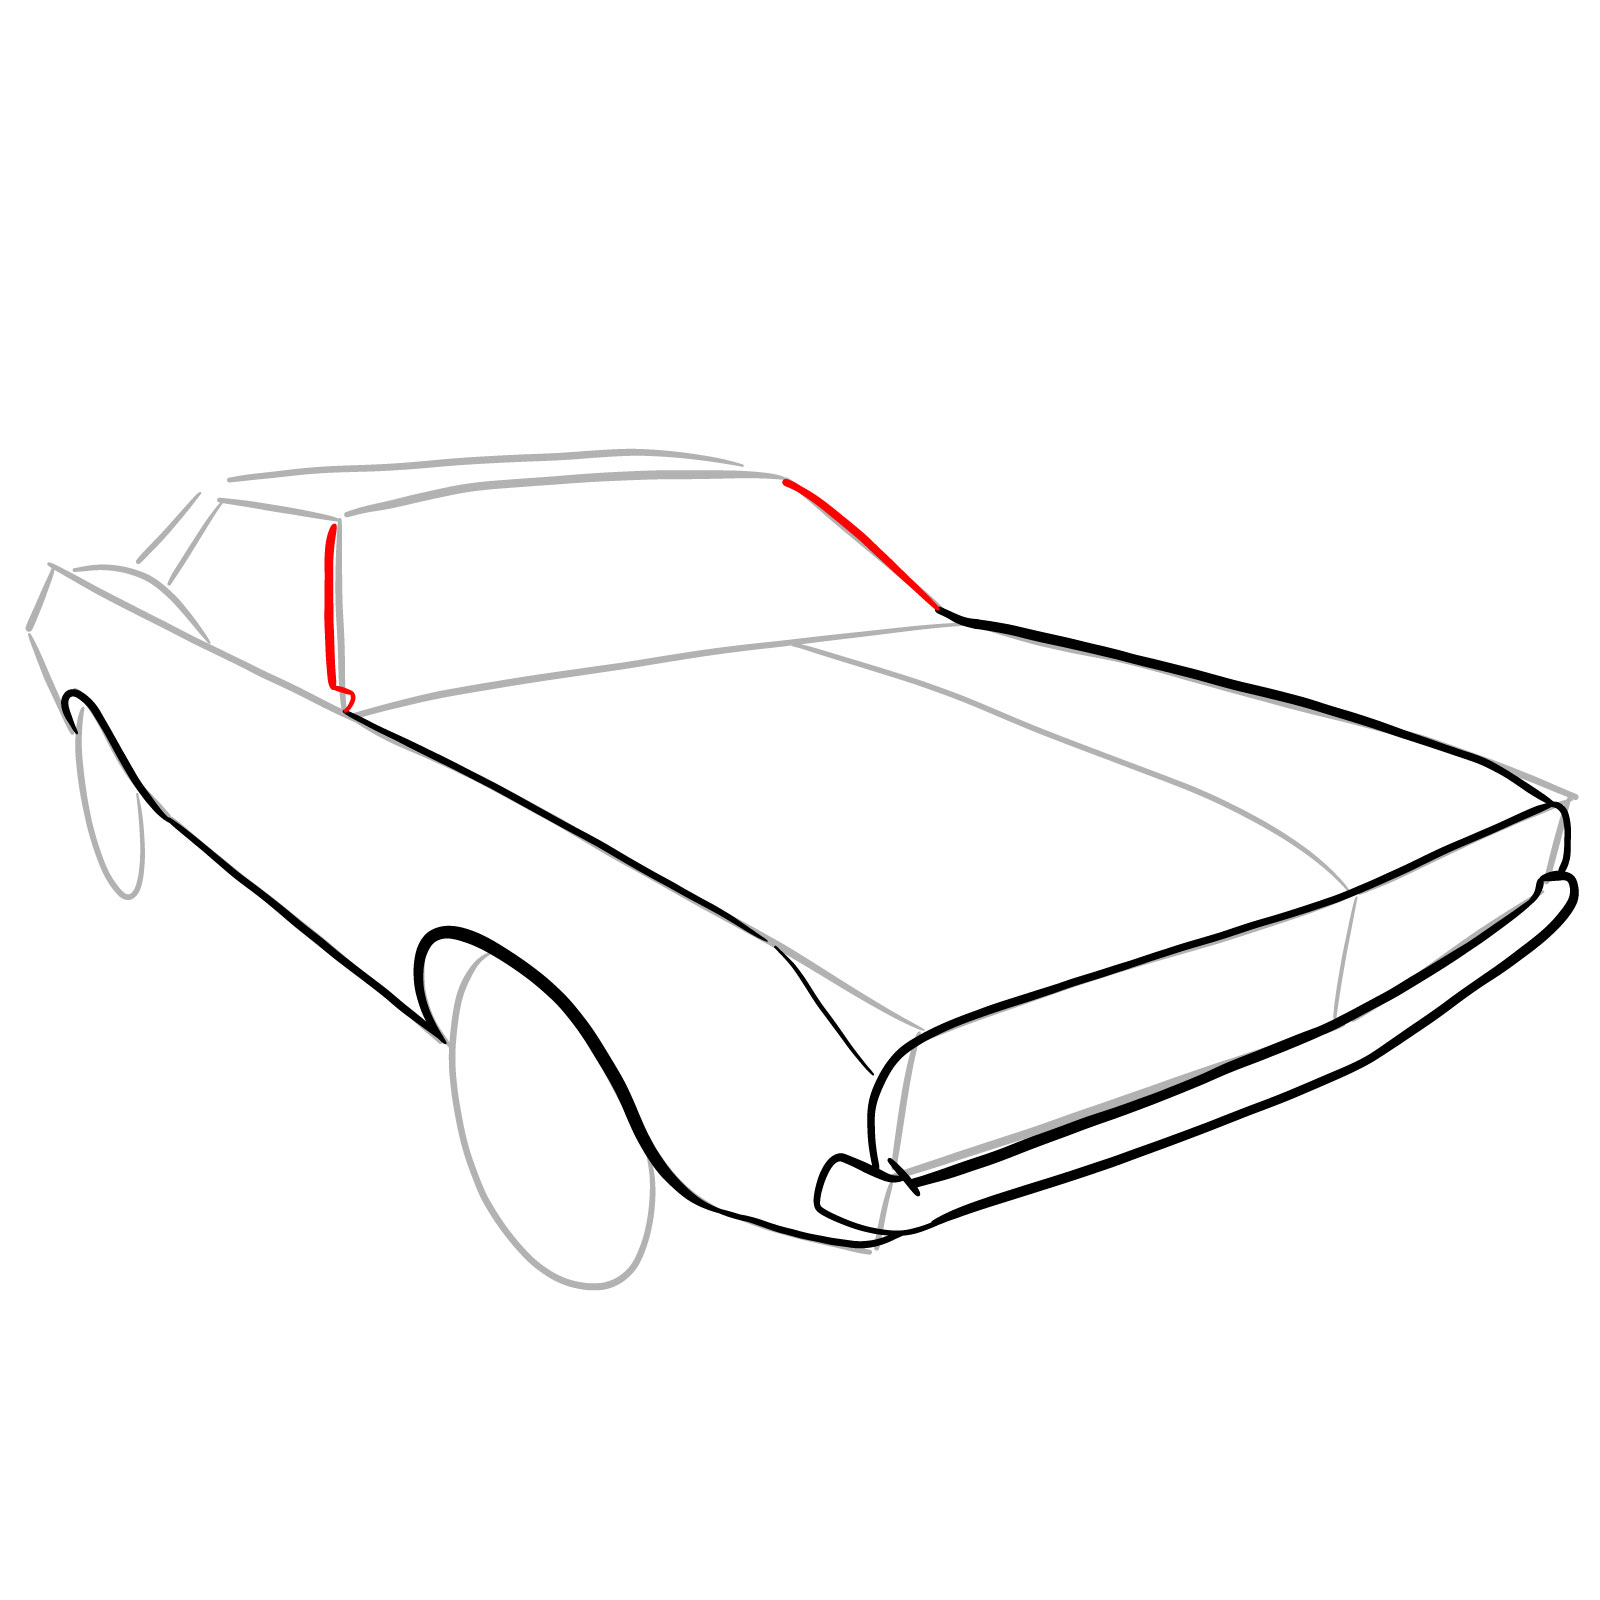 How to draw Dodge Challenger 1970 - step 10